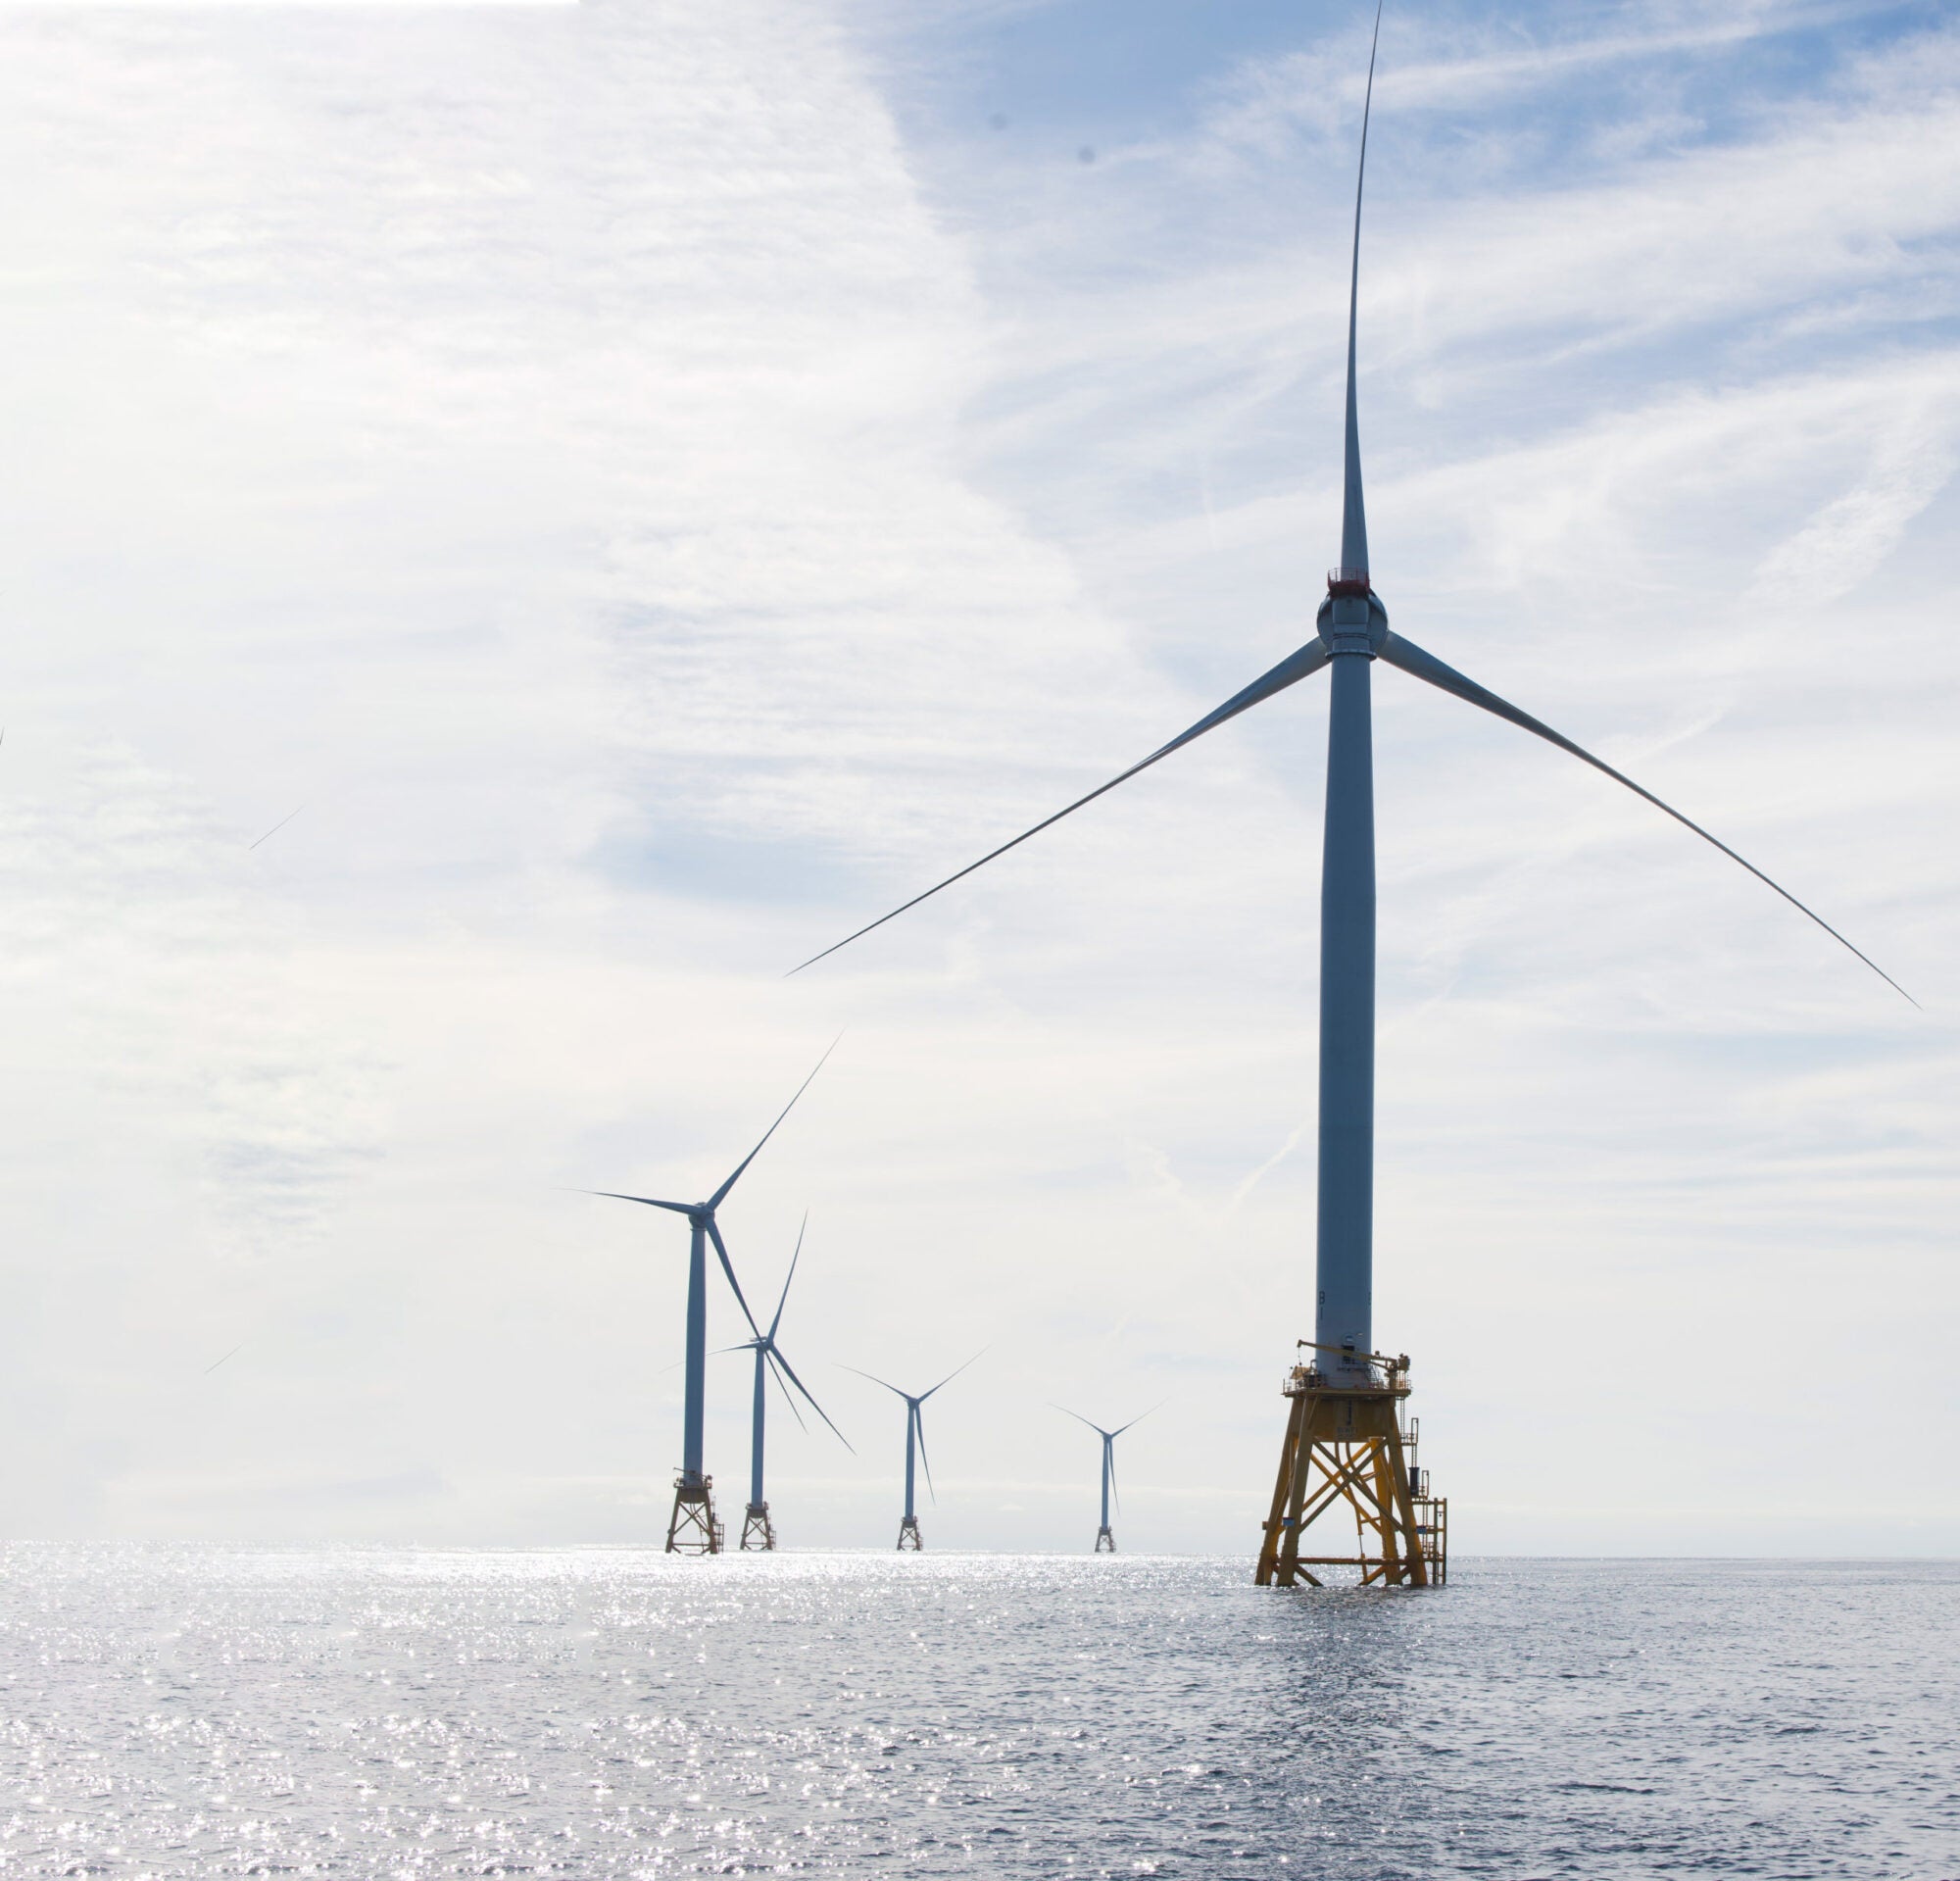 An offshore wind turbine in nation‘s first offshore wind farm off the coast of Block Island, where CRC developed the zoning plan